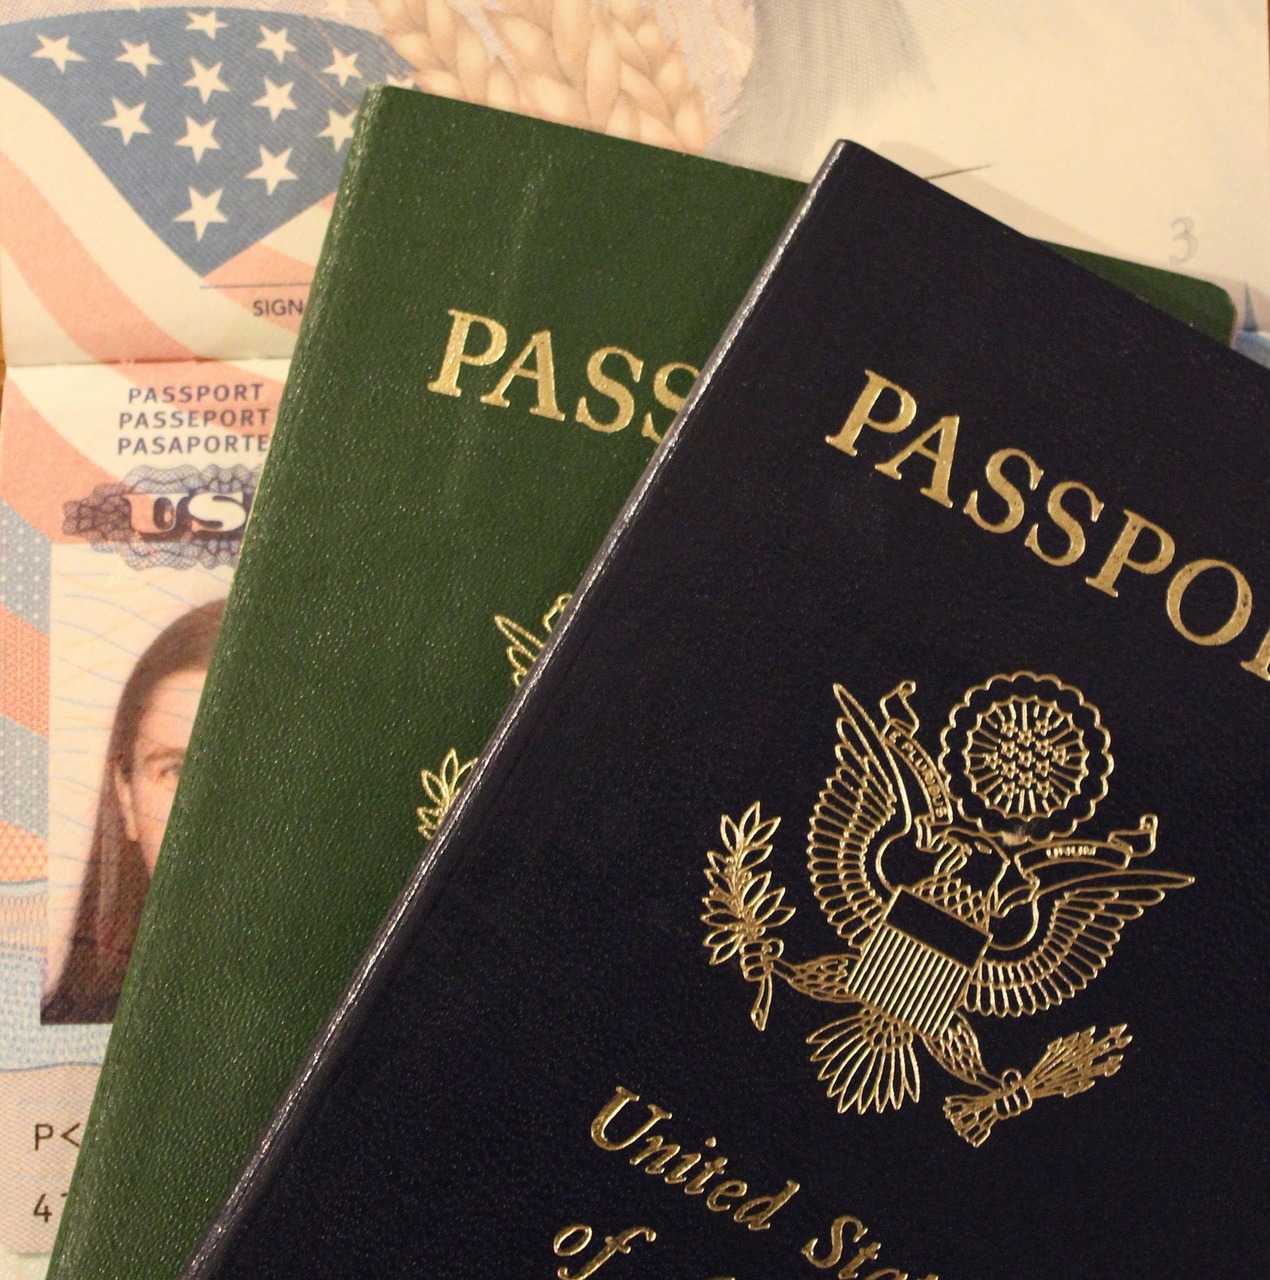 Revision in the Passport Services of Older Travelers